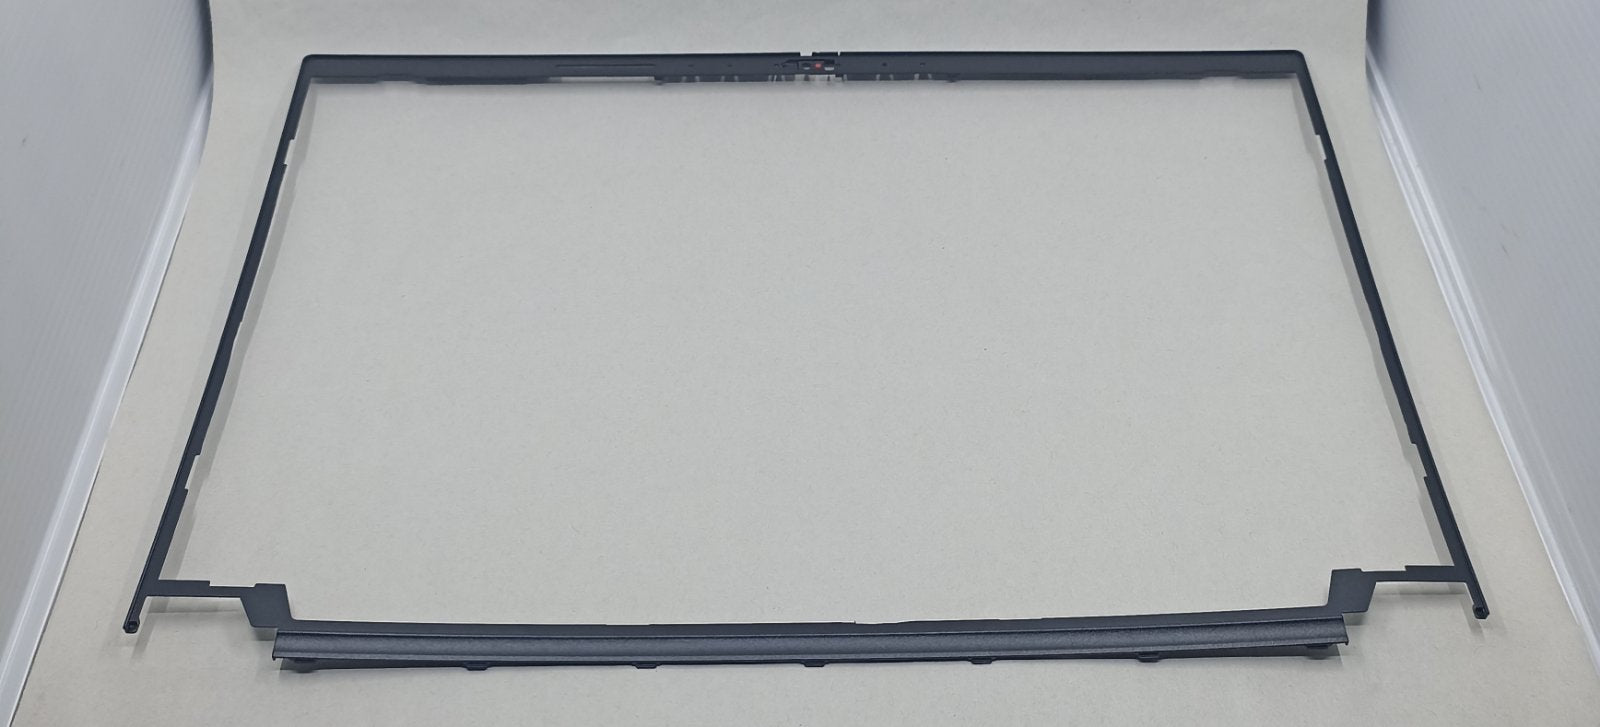 Replacement LCD Bezel for Lenovo T14s Gen 2 ThinkPad WL